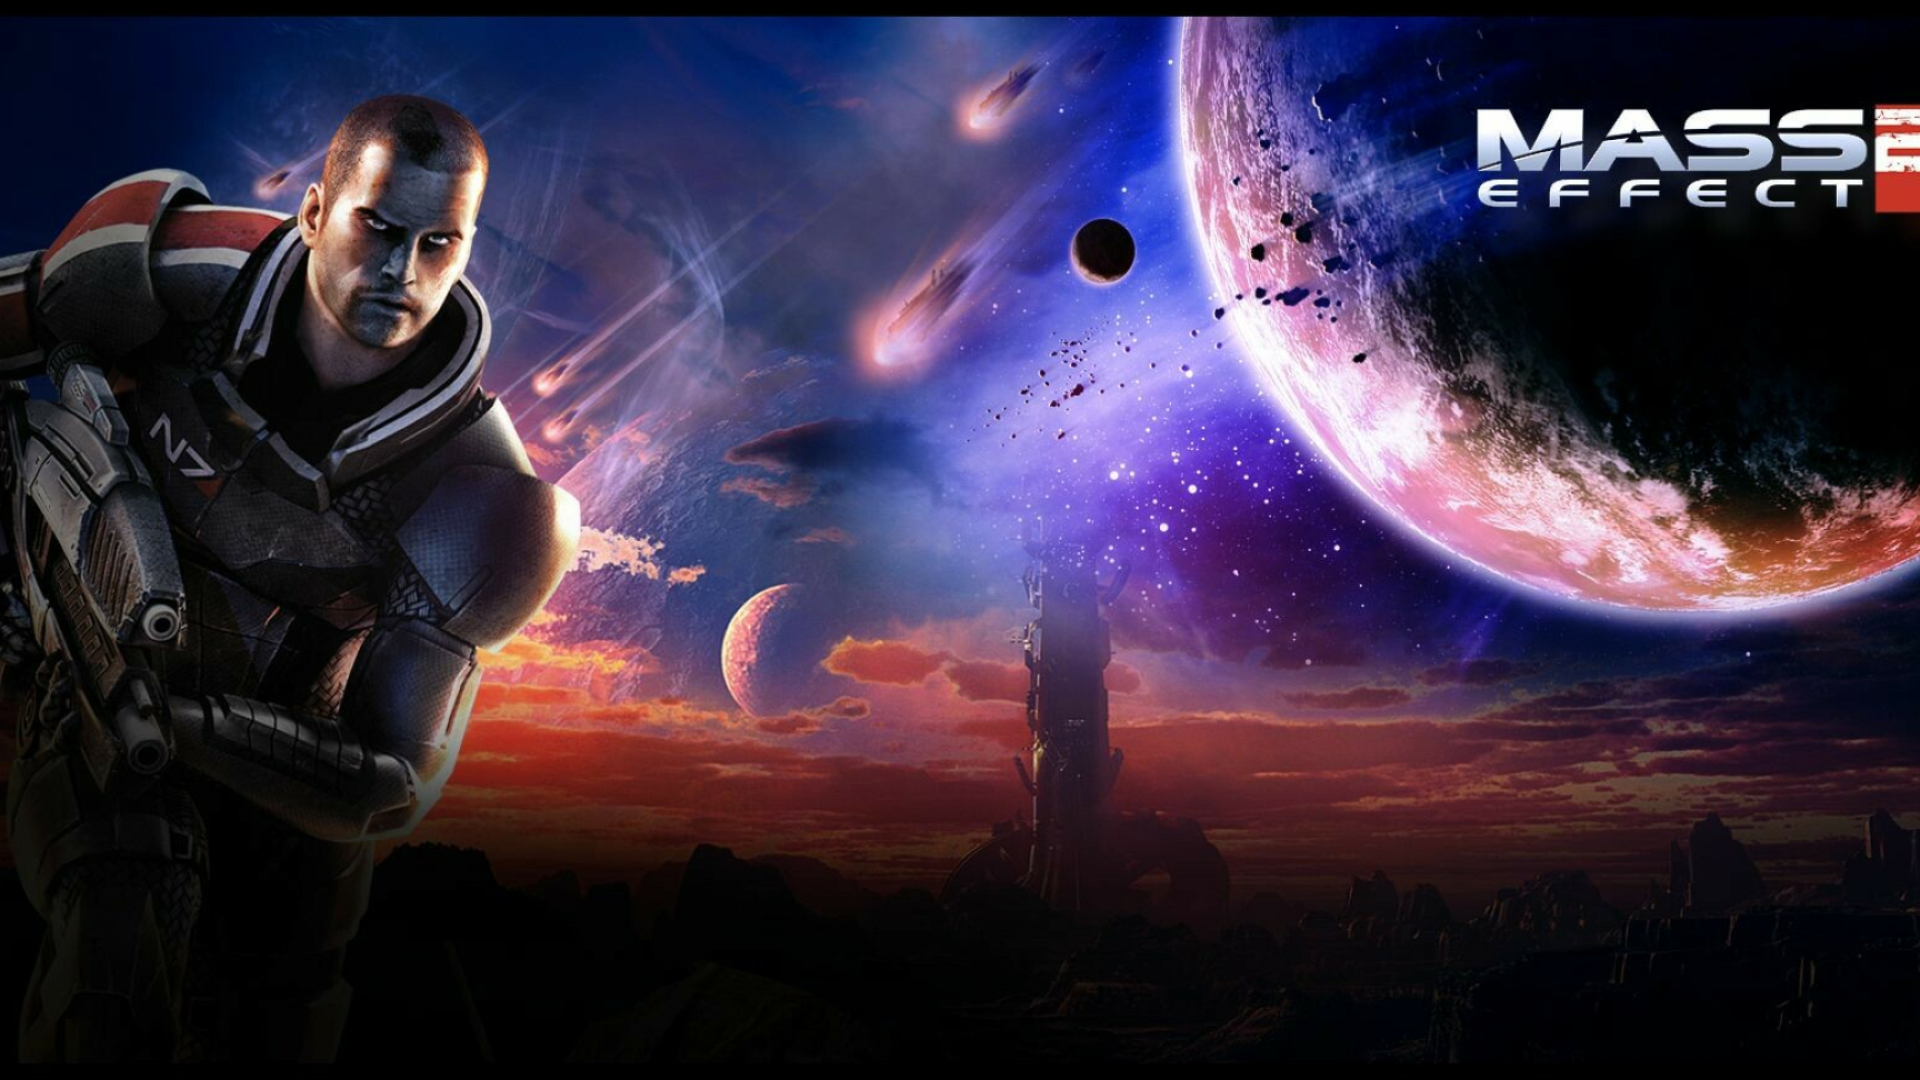 Mass Effect 2: The player assumes the role of Commander Shepard, an elite human soldier. 1920x1080 Full HD Wallpaper.